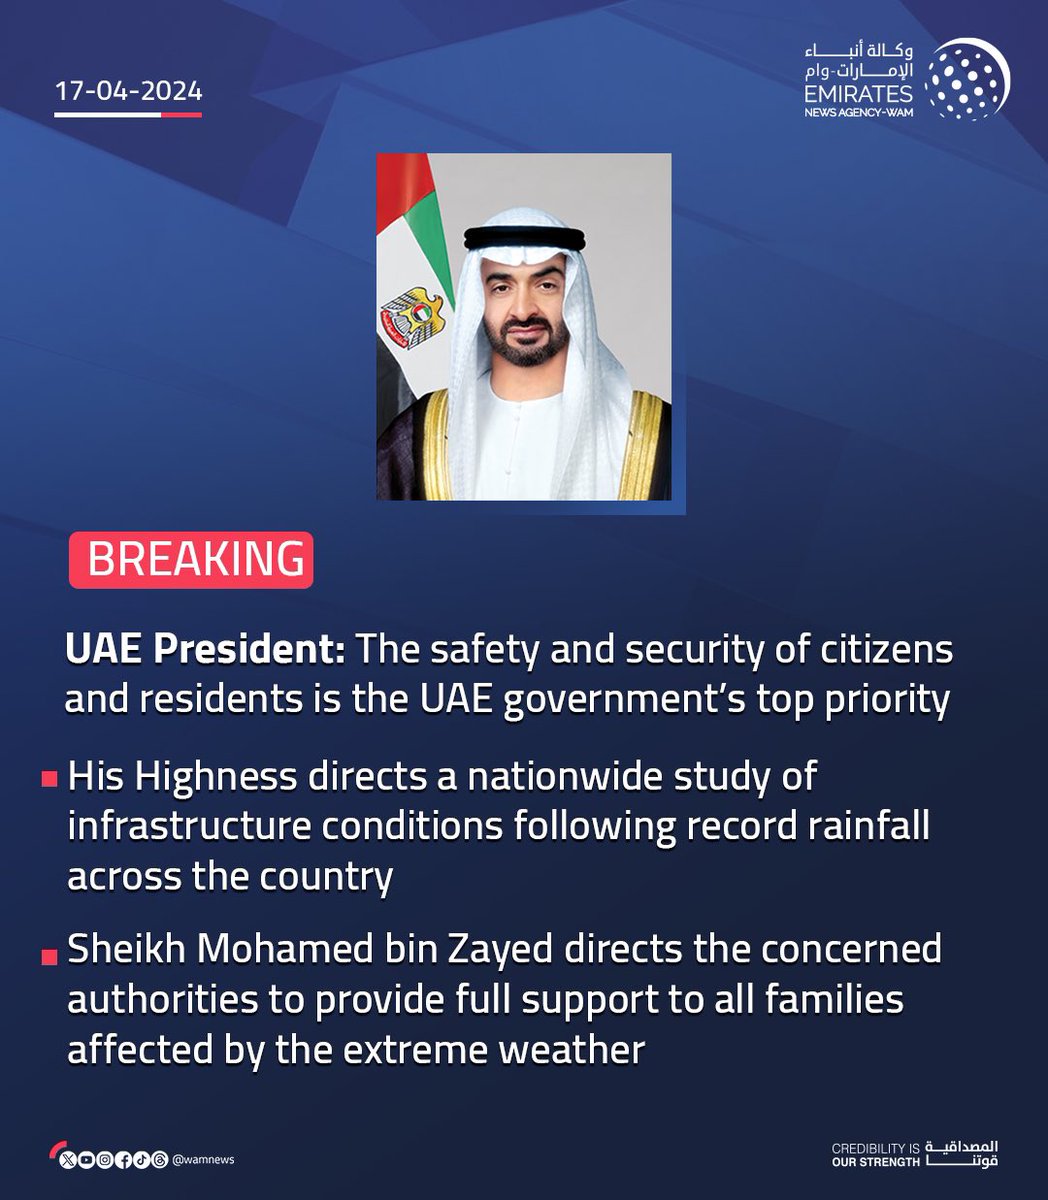 🚨BREAKING The President of the #UAE Sheikh Mohammed bin Zayed directs all authorities to provide full support to all families affected by the extreme weather conditions that hit the country. Everyone is equal, everyone is safe in a land ruled by HH @MohamedBinZayed